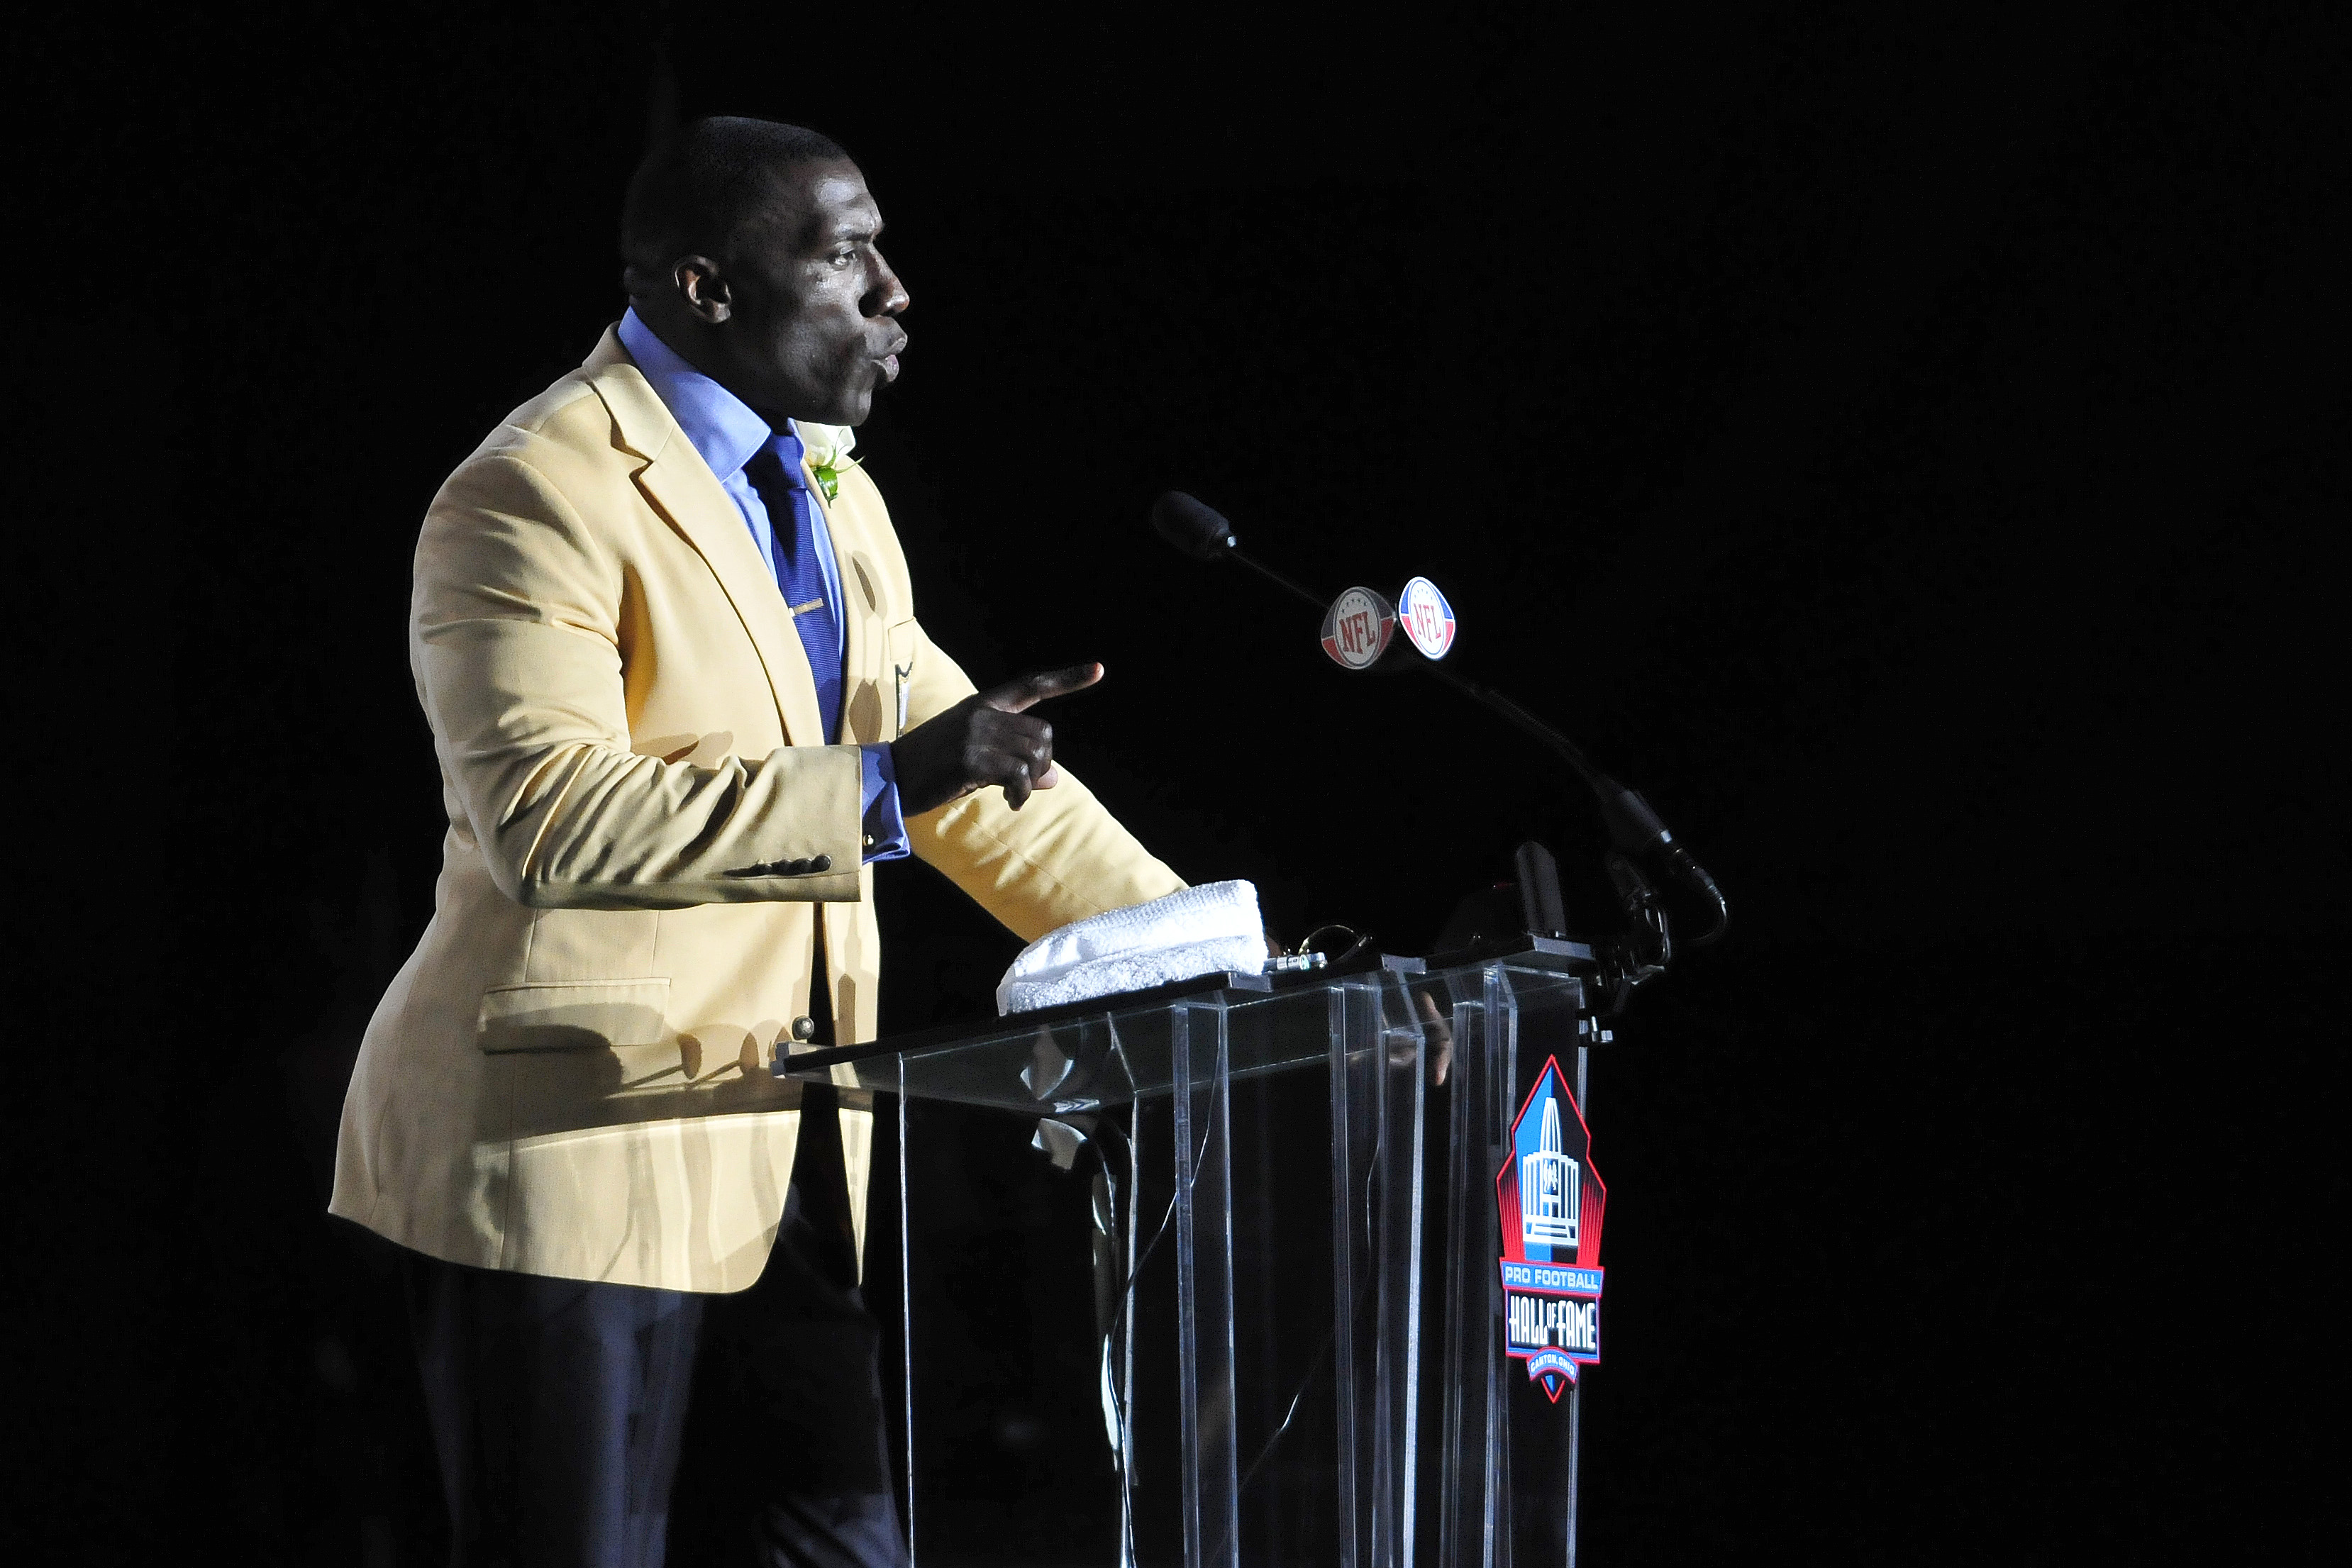 CANTON, OH - AUGUST 6:  Former Denver Broncos tight end Shannon Sharp talks to the fans after he unveiled his bust at the Enshrinement Ceremony for the Pro Football Hall of Fame on August 6, 2011 in Canton, Ohio.  (Photo by Jason Miller/Getty Images)